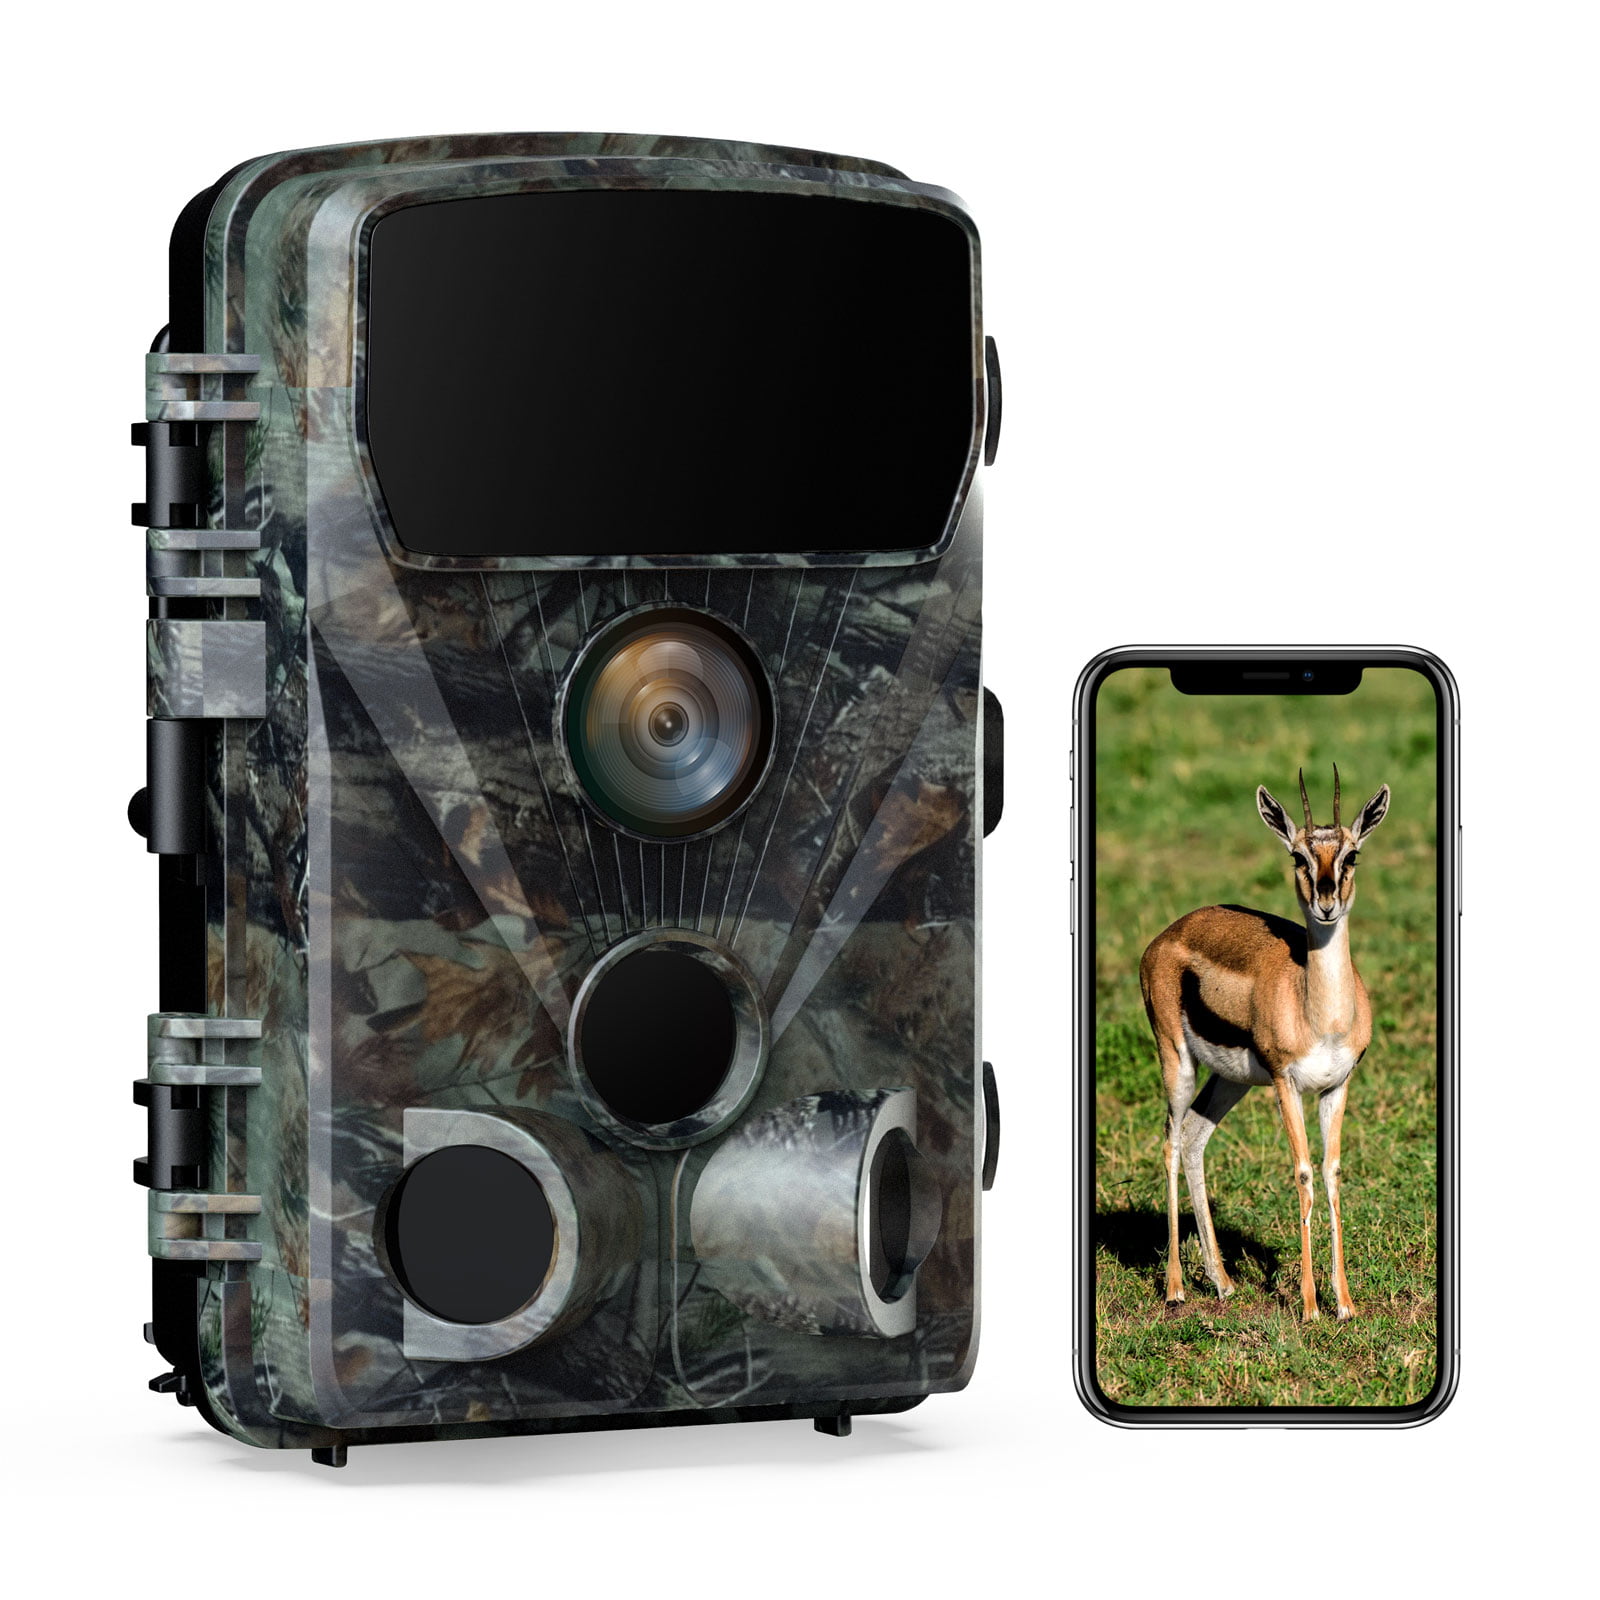 TOGUARD WiFi Bluetooth Trail Camera 4K 24MP Game Hunting Camera with 65ft  Infrared Night Vision Waterproof 0.2s Trigger Motion Activated 120°  Wide-Angle Deer Tail Cam for Wildlife Monitoring 2.4